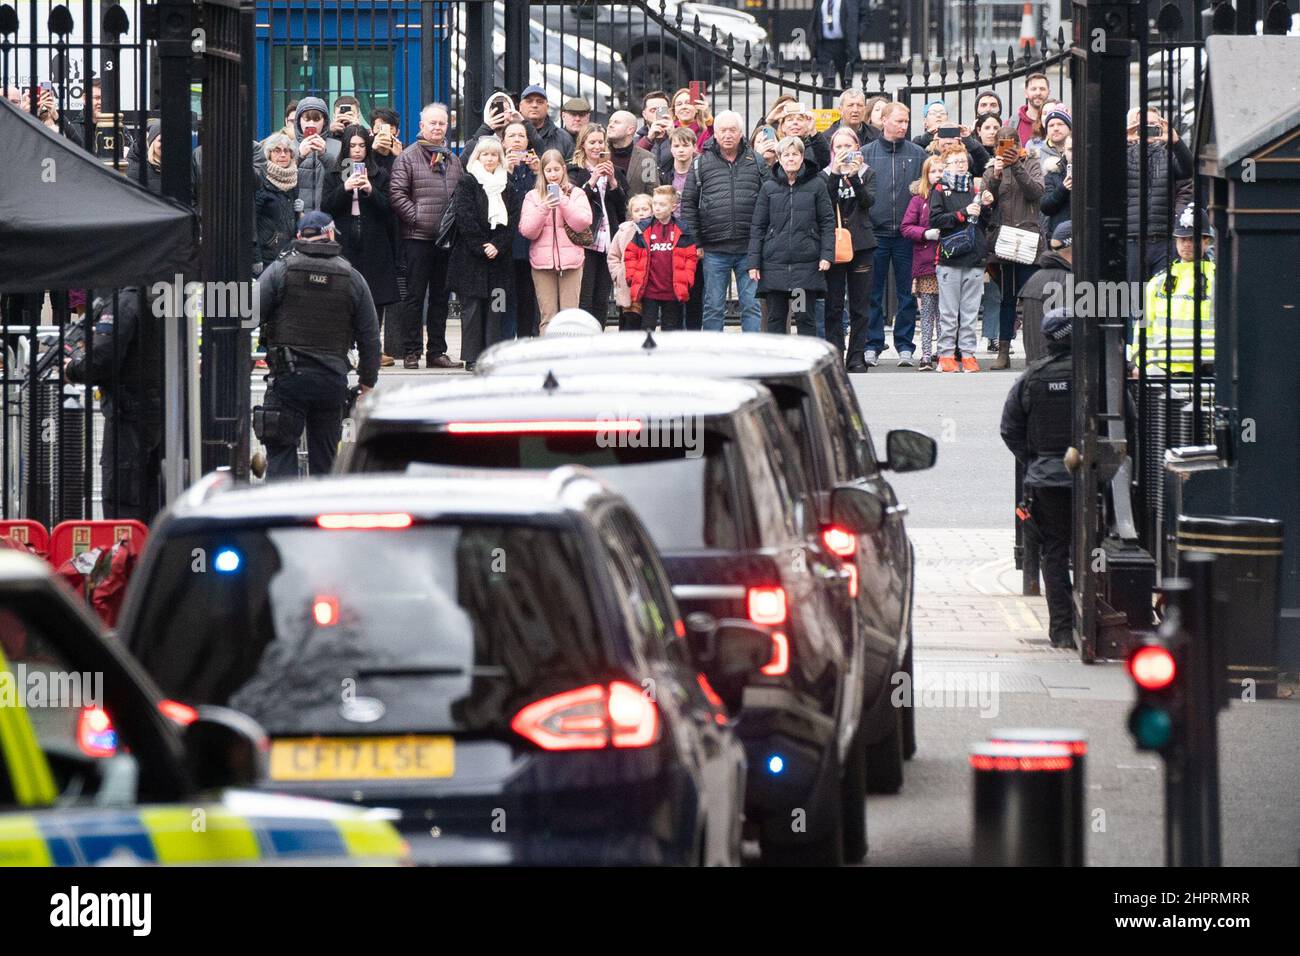 Members of the public watch as Prime Minister Boris Johnson's motorcade leaves 10 Downing Street, London on it's way to the Houses of Parliament where the Prime Minister will face PMQs. Stock Photo